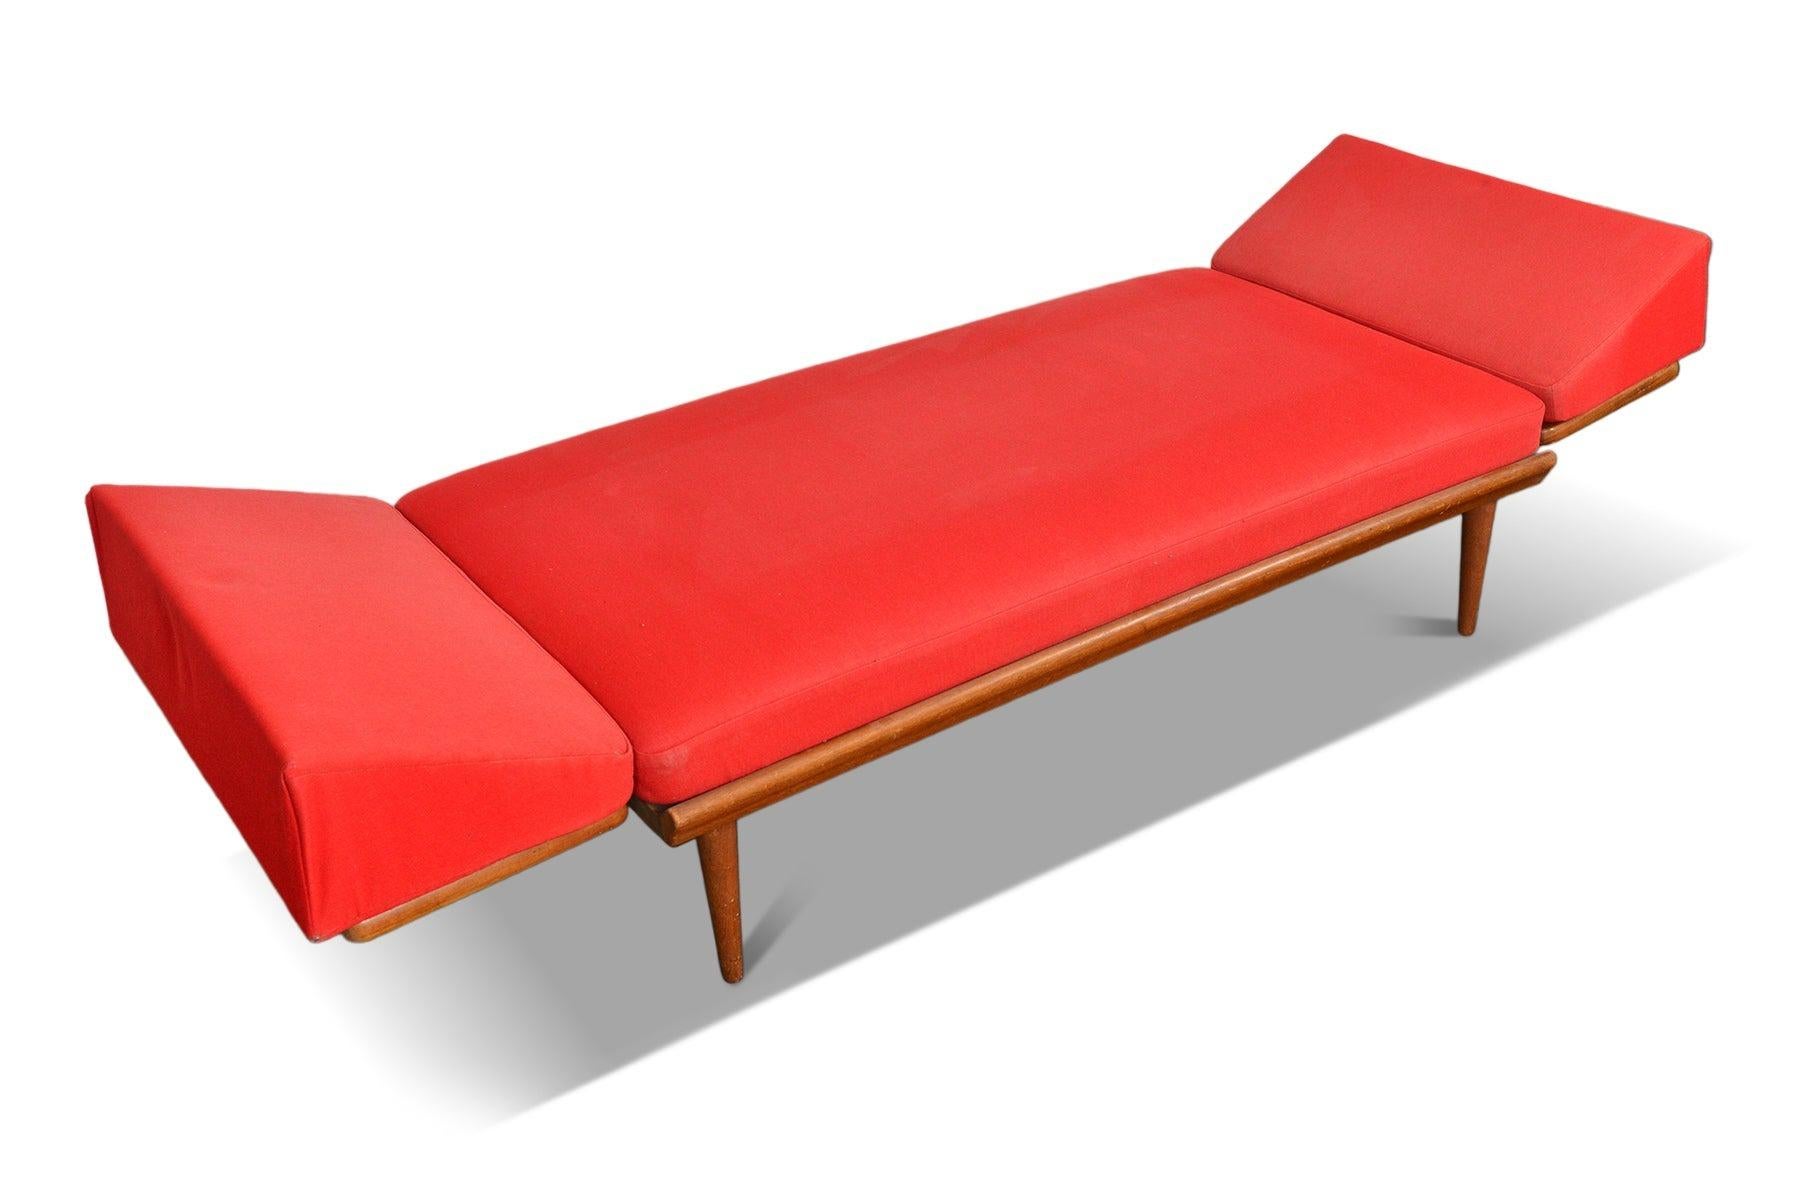 20th Century Teak + Cane Loveseat / Daybed By Peter Hvidt For Sale